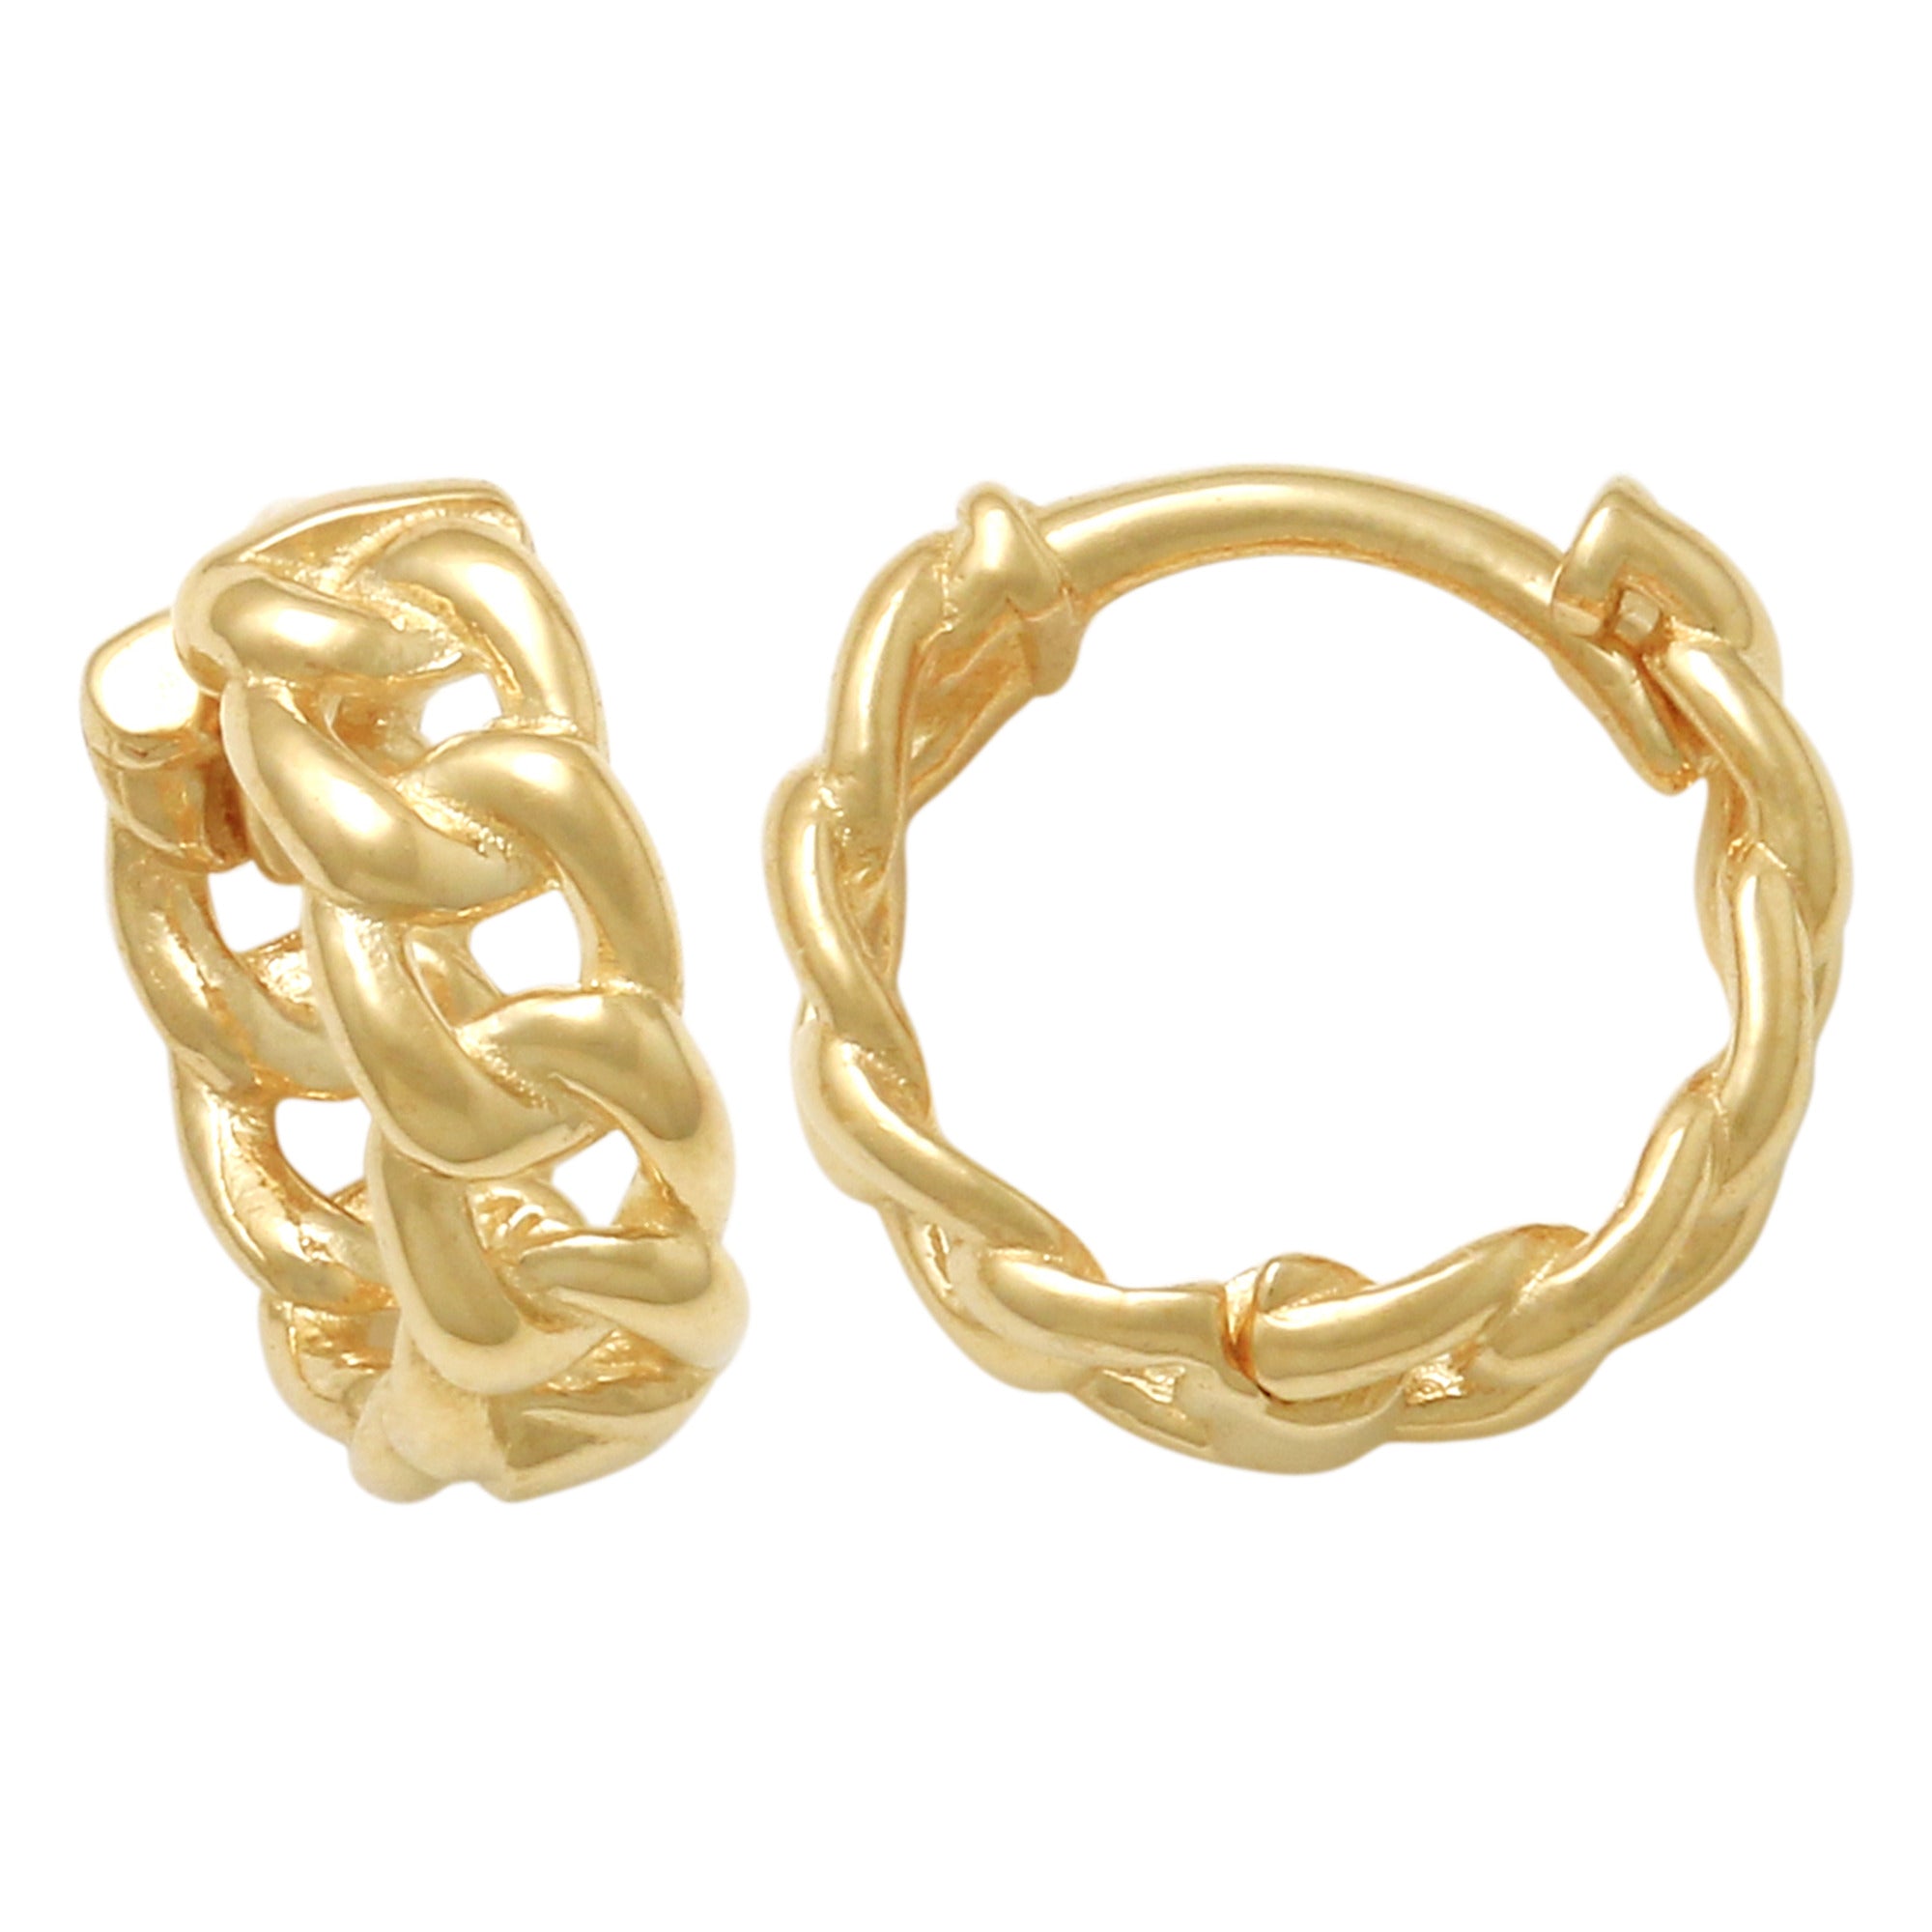 14K Solid Gold Endless Chain Rope Hoop Earrings - Anygolds 